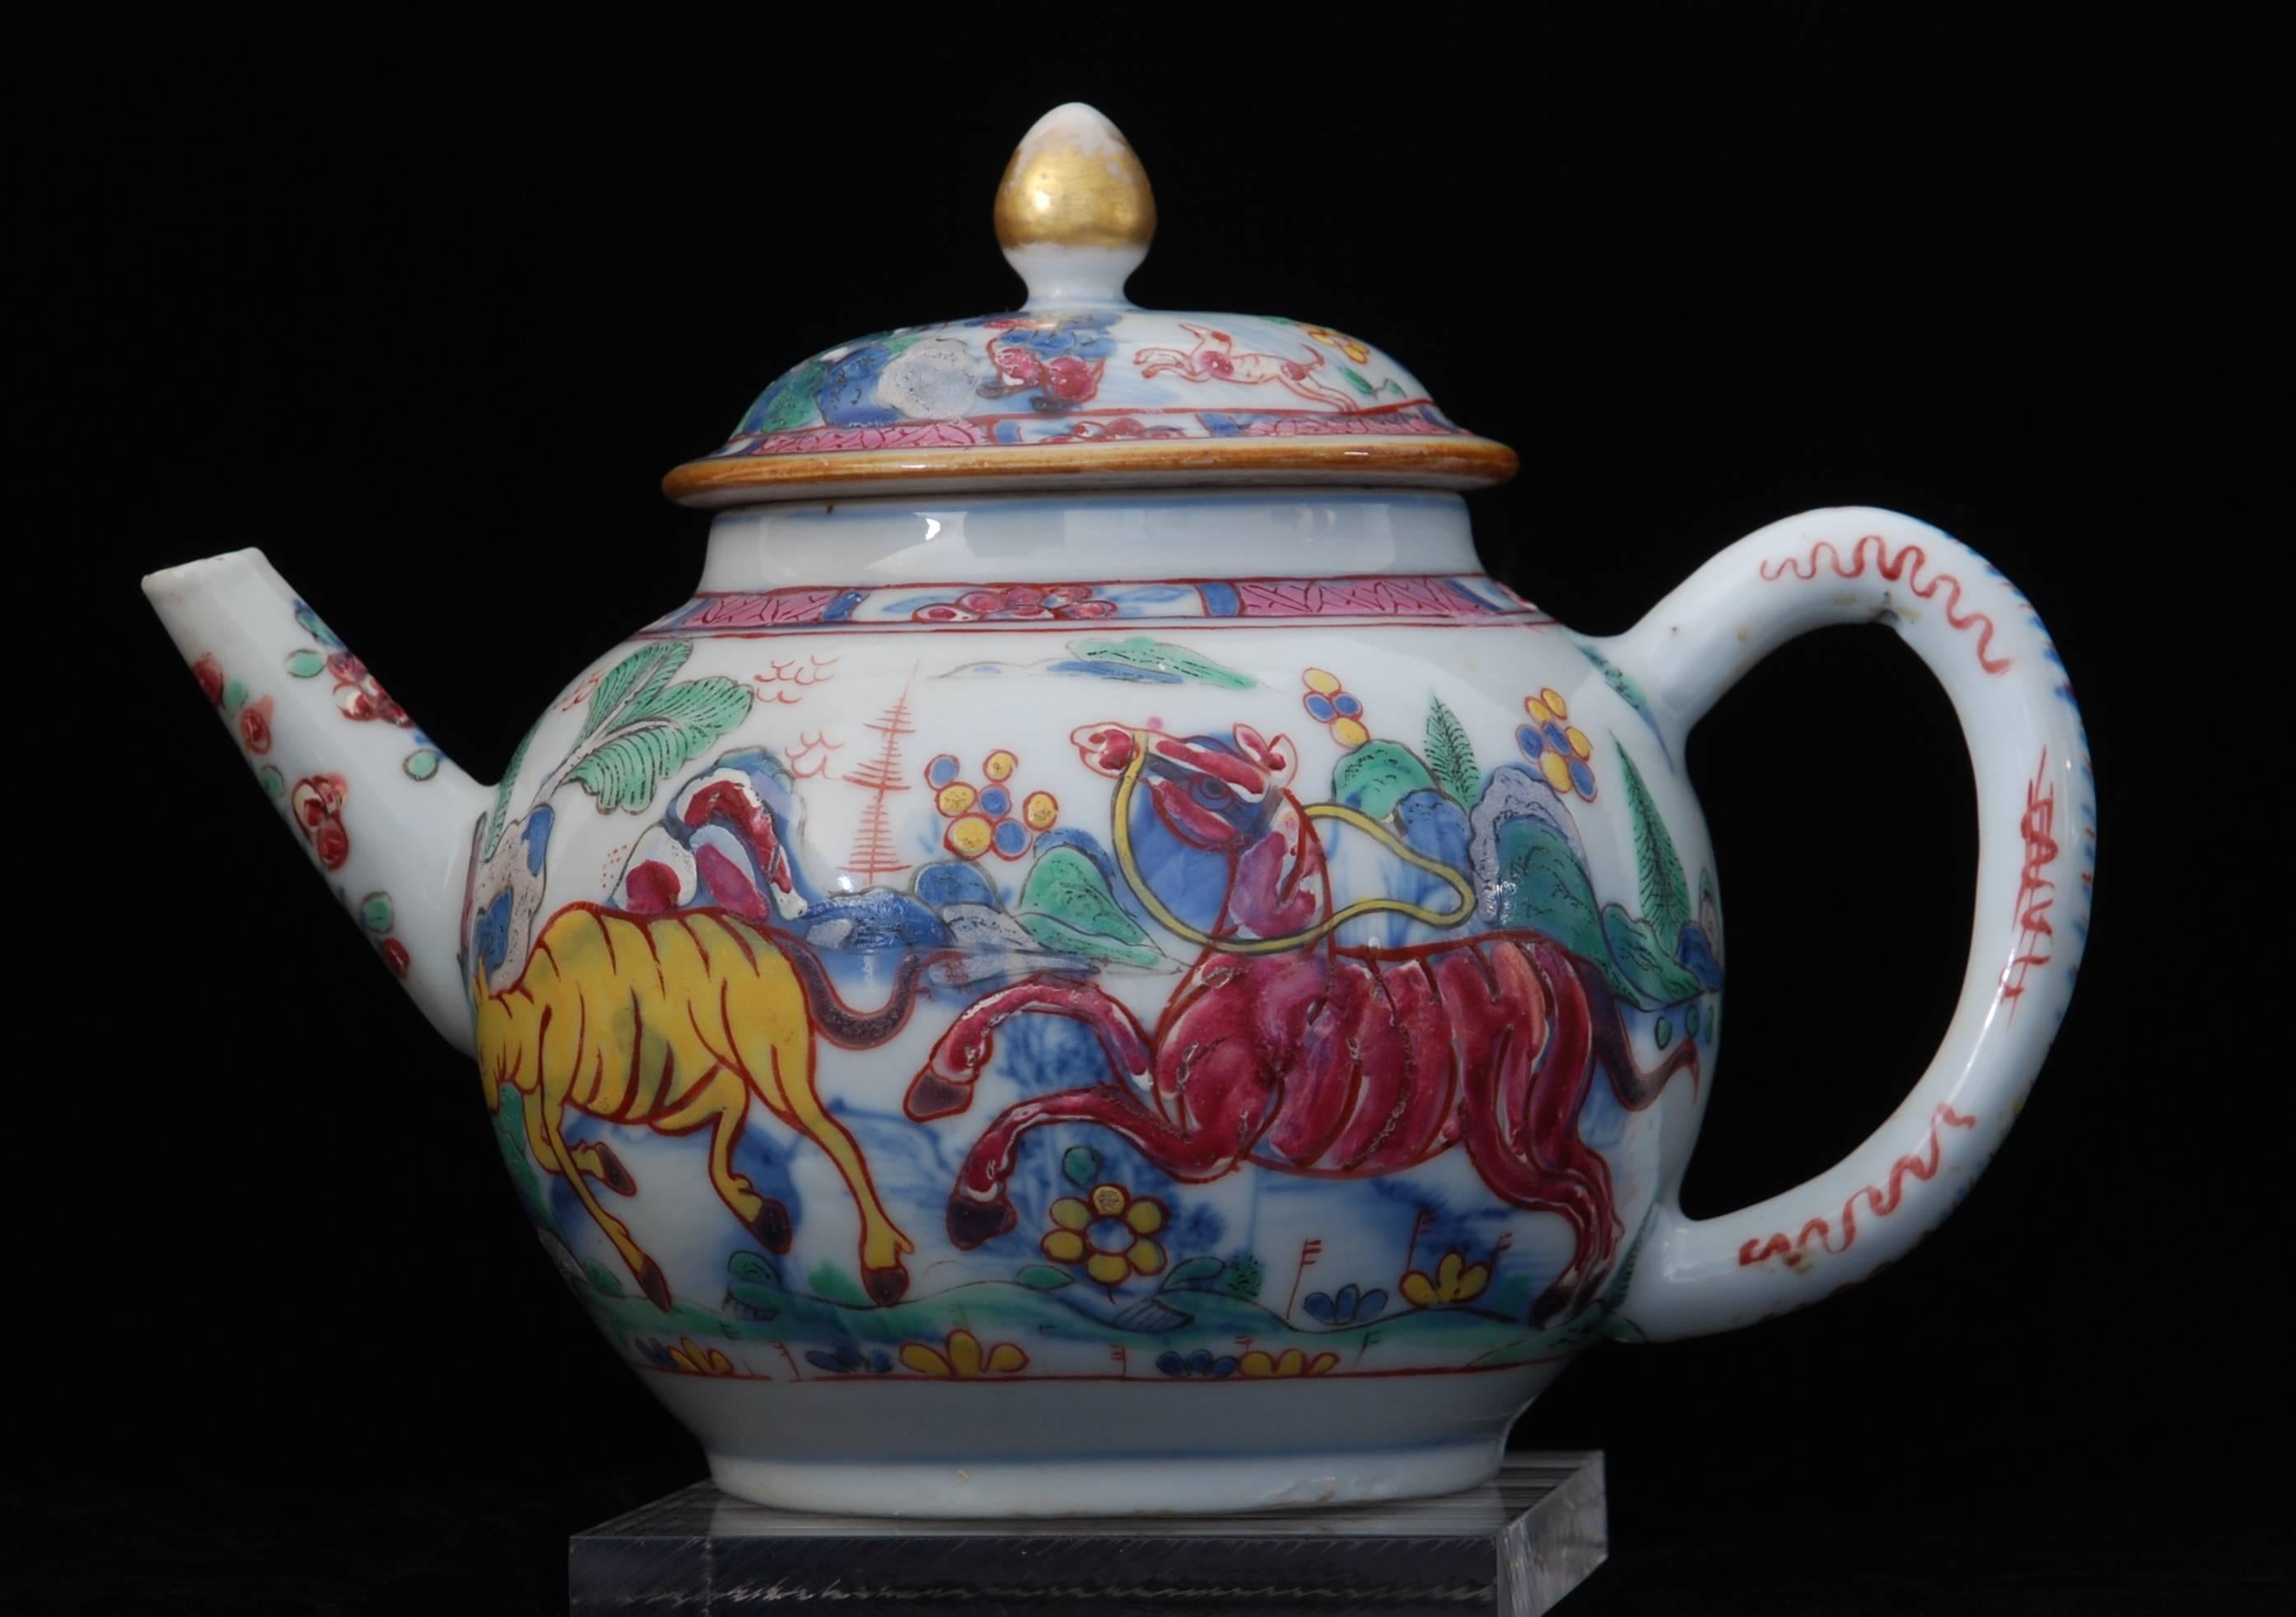 Chinoiserie Teapot, Prancing Ponies, China, circa 1760, Decorated in London